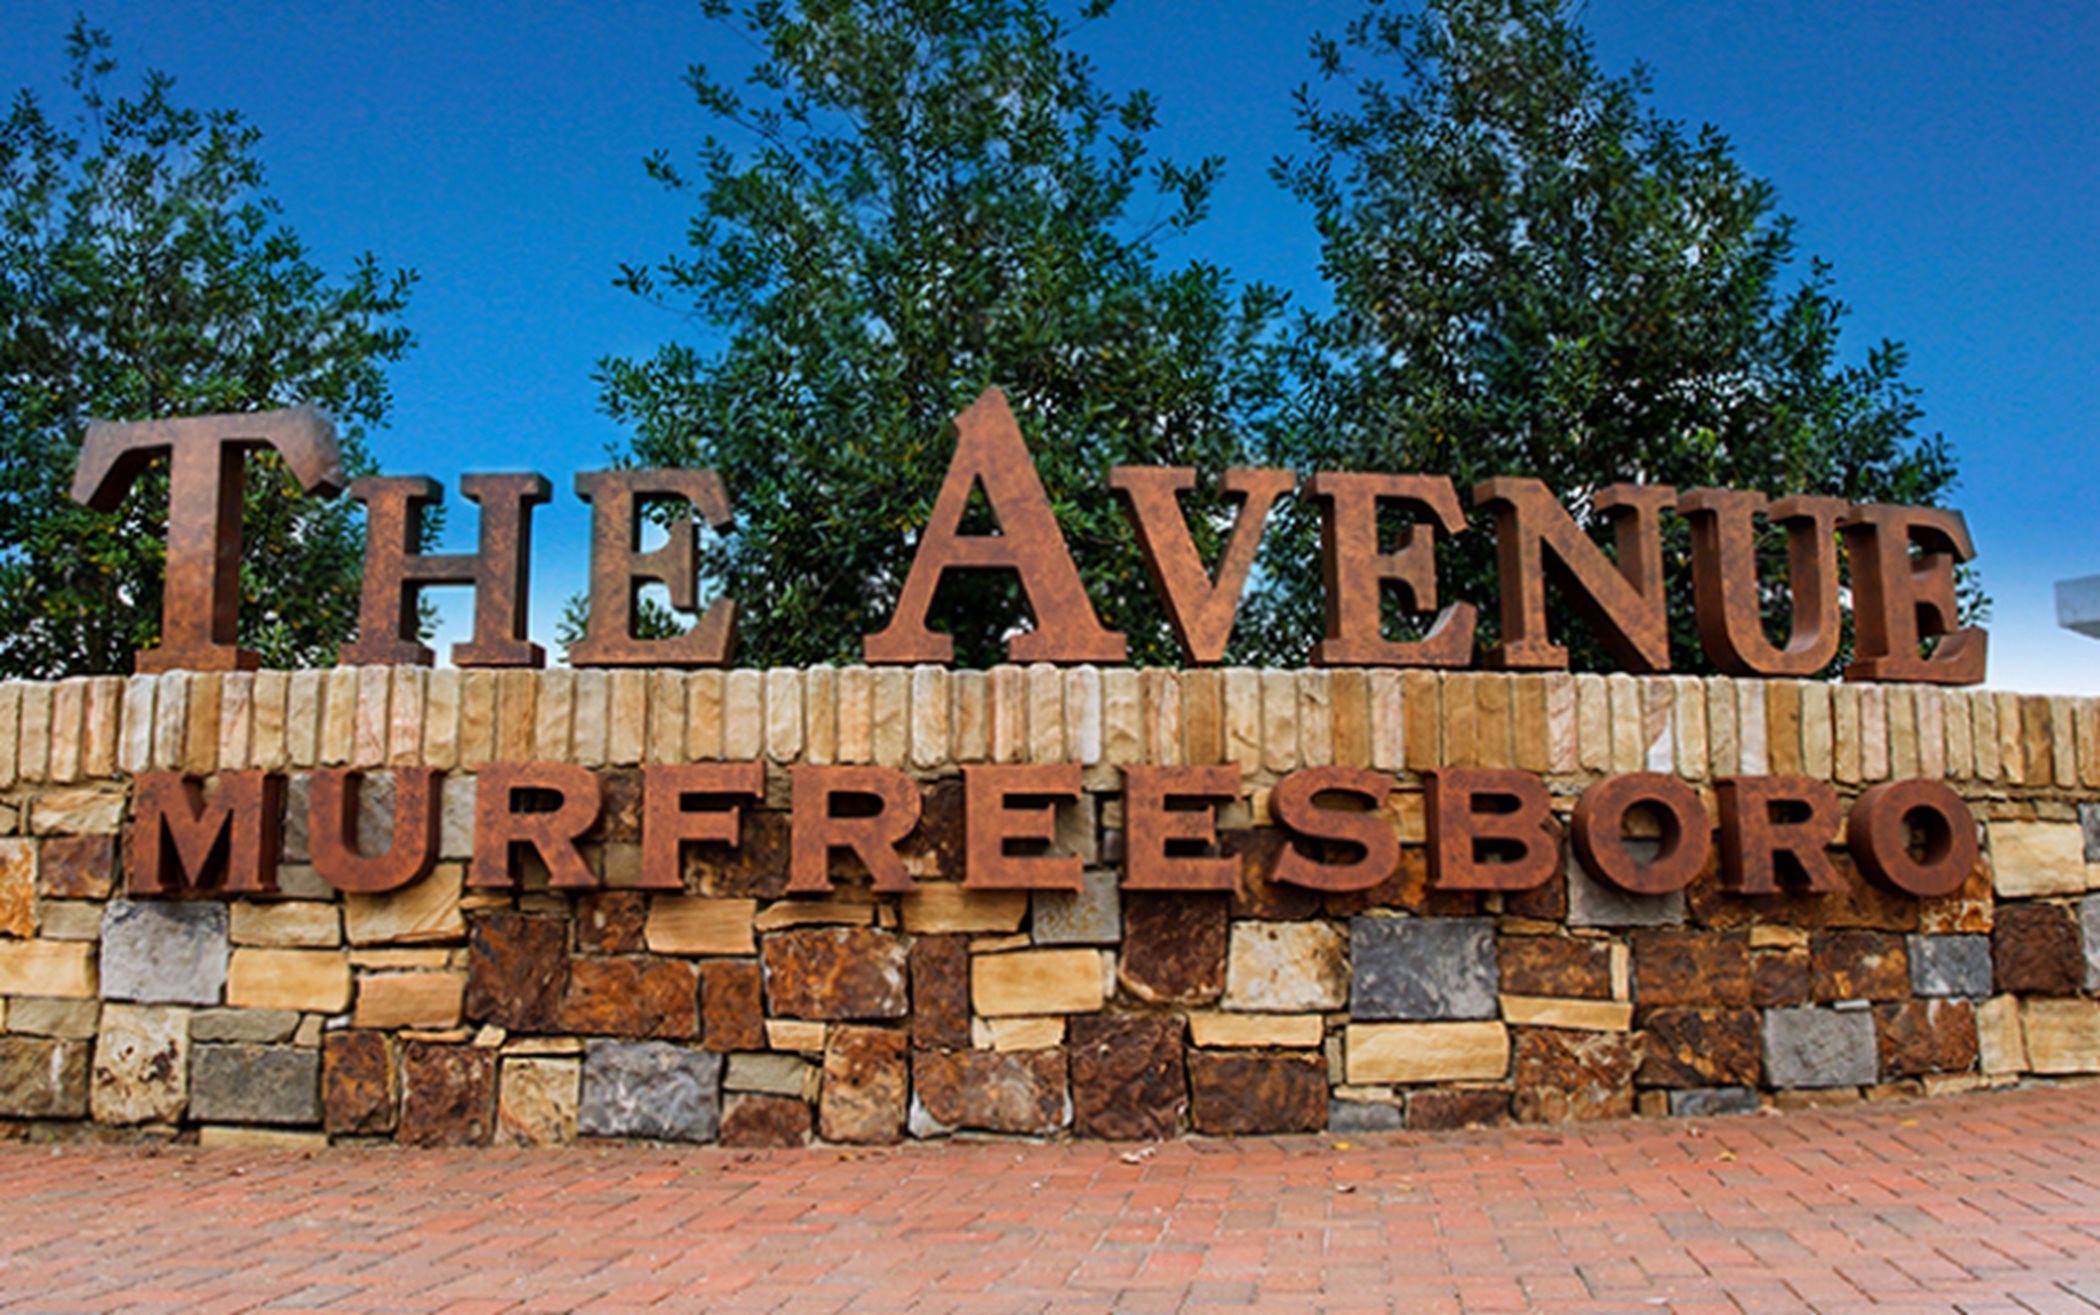 The Avenue Sign